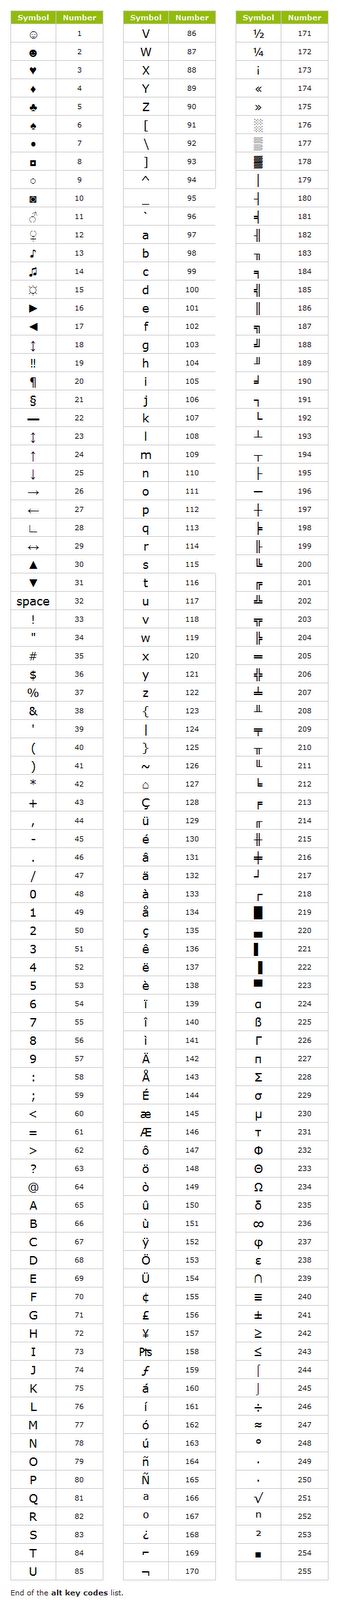 Cheat sheet for alt codes to make special symbols.